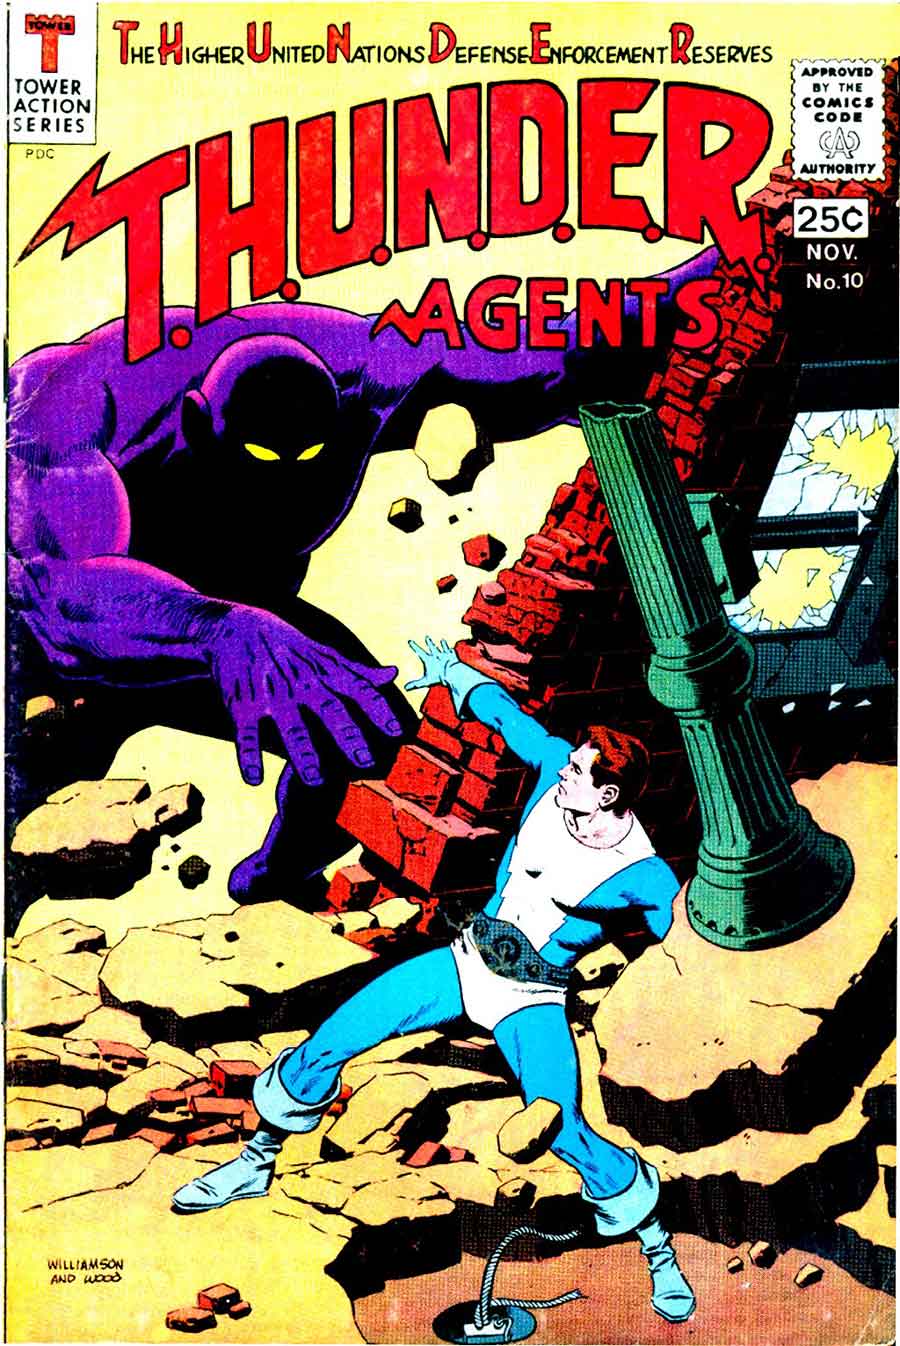 Thunder Agents v1 #10 tower silver age 1960s comic book cover art by Wally Wood, Al Williamson